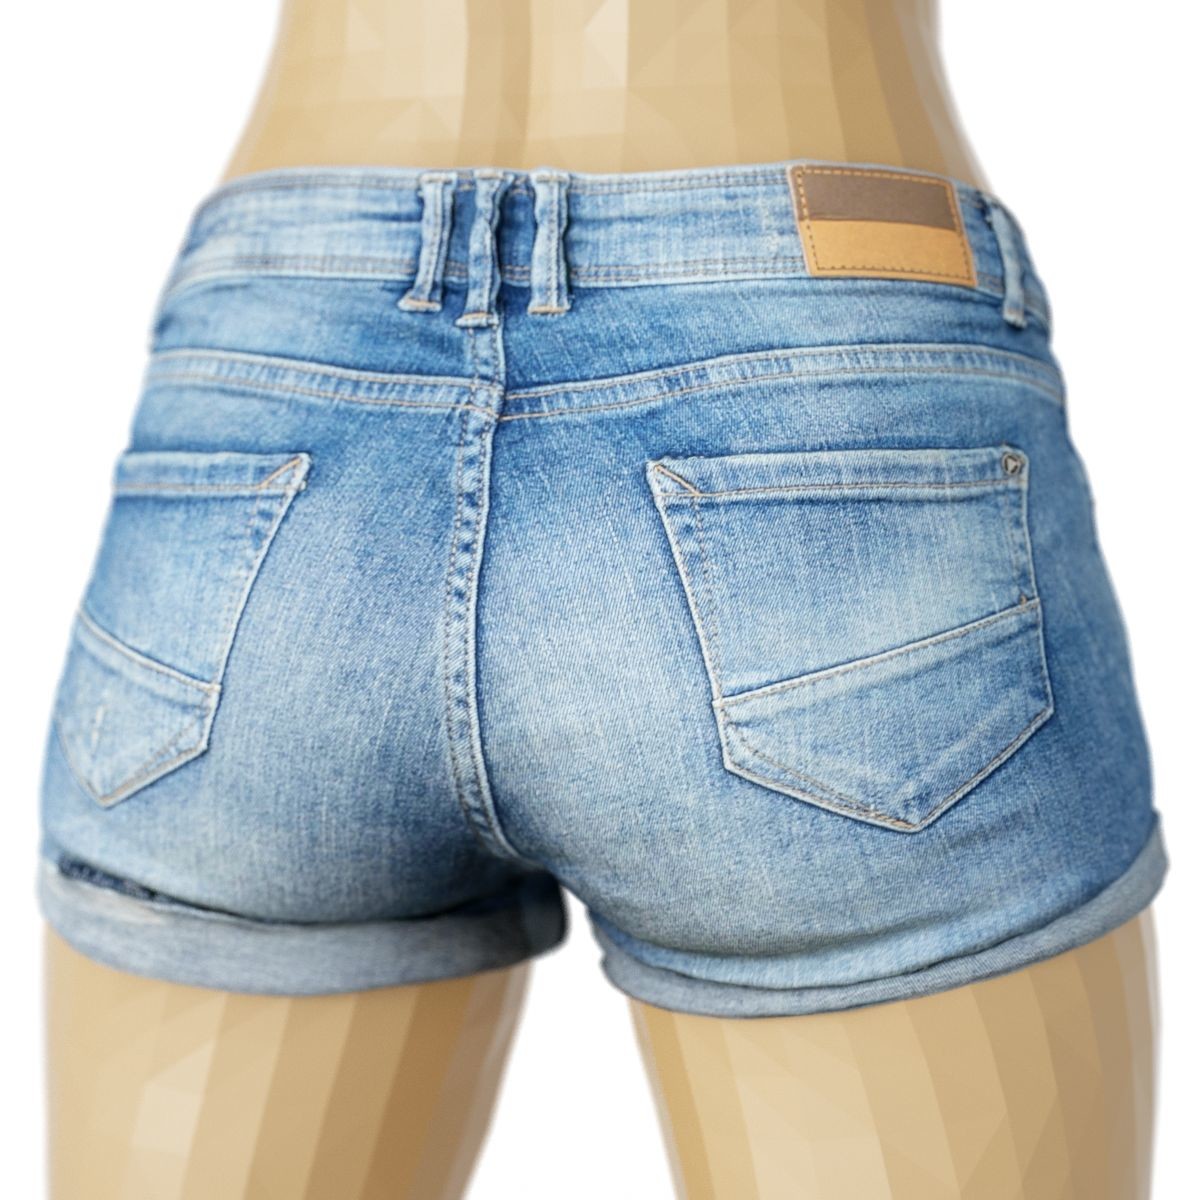 ArtStation - Vintage Shorts Jeans Ripped | Resources